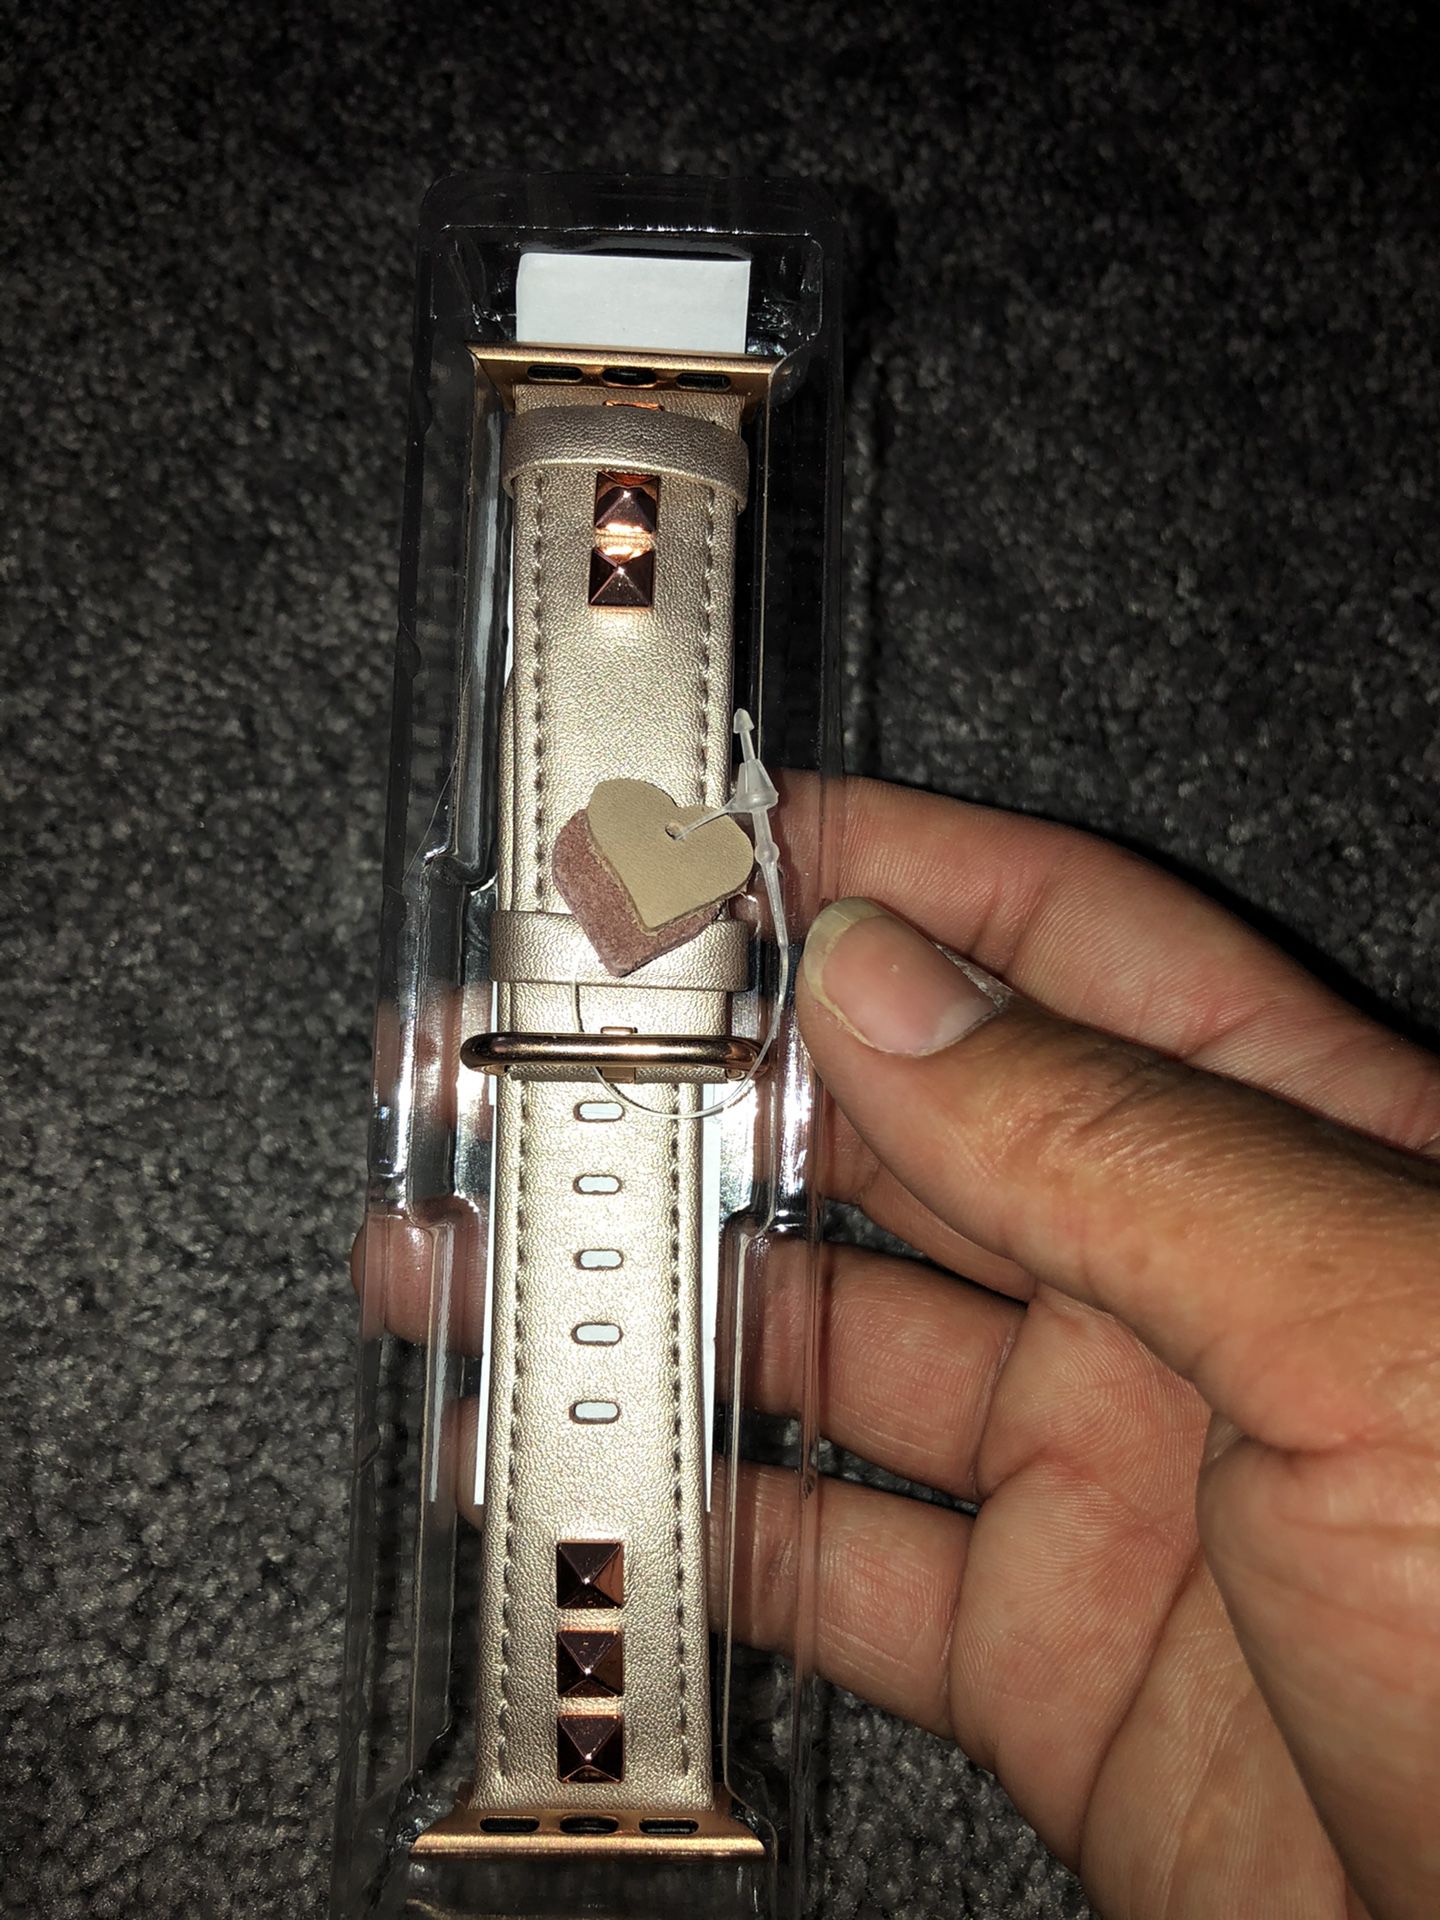 Fitbit watchband $10